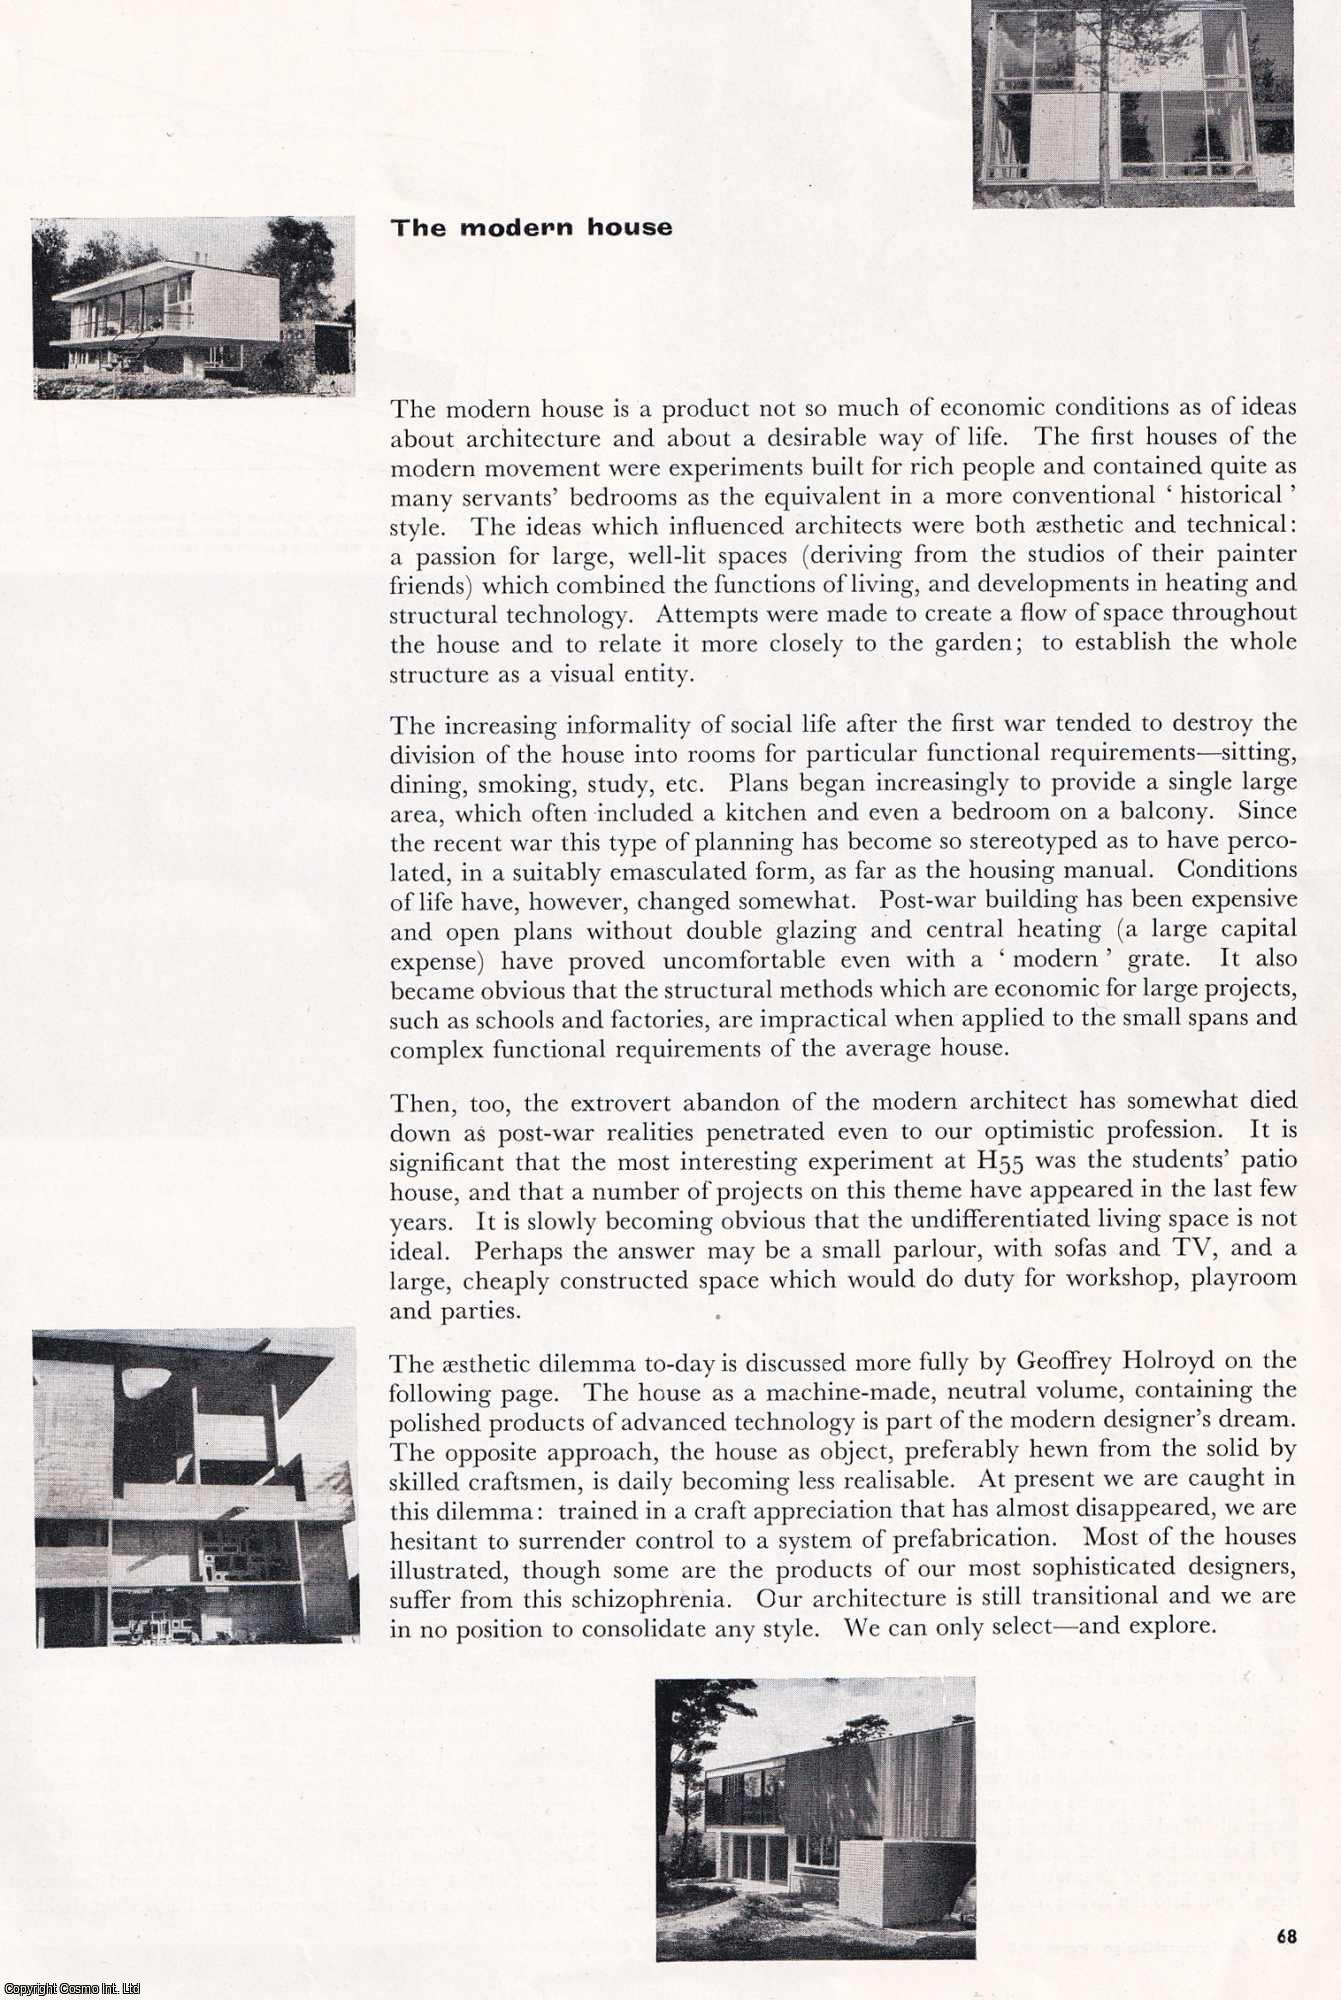 HOUSING - The Modern House; ideas about architecture and a desirable way of life. Featuring numerous examples of architect designed properties. By Geoffrey Holroyd. This is an original article from The Architectural Review, 1955.